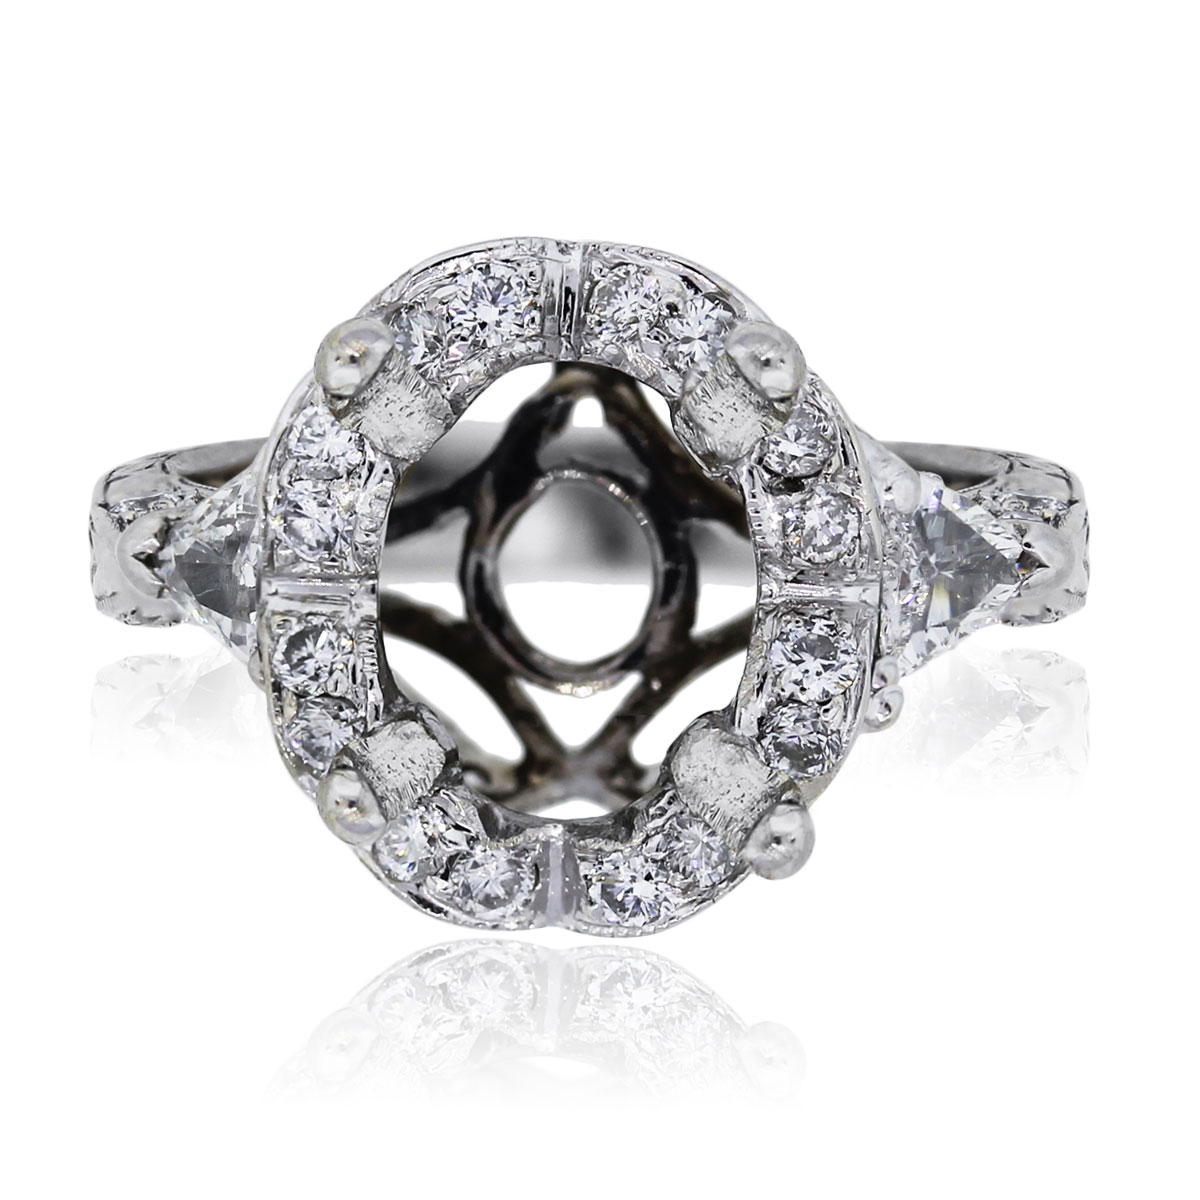 You are viewing this 14k White Gold Trillion and Round Brilliant Diamond Mounting!